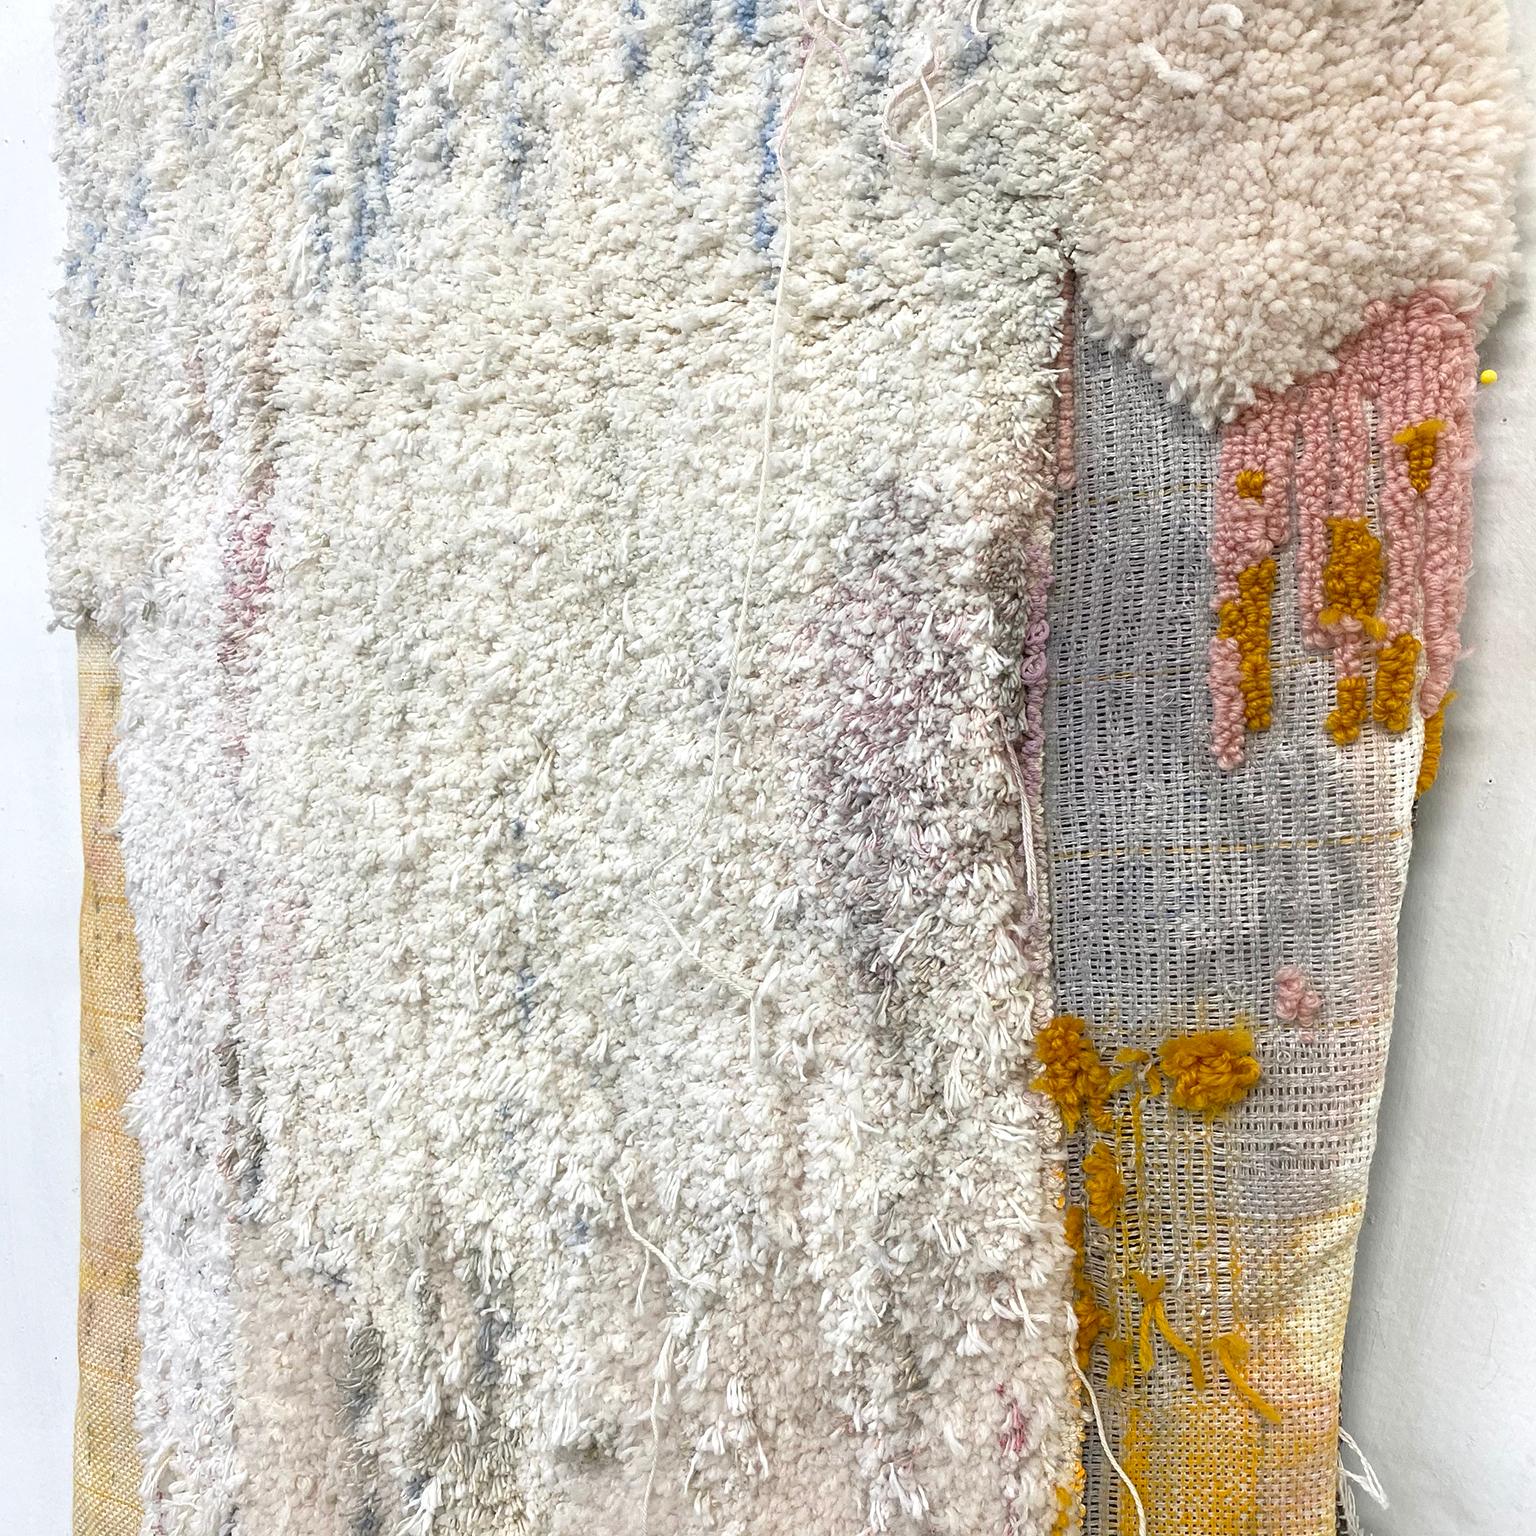 Large Textile Wall Hanging Sculpture: 'Jumpsuit' - Contemporary Mixed Media Art by Judy Rushin-Knopf